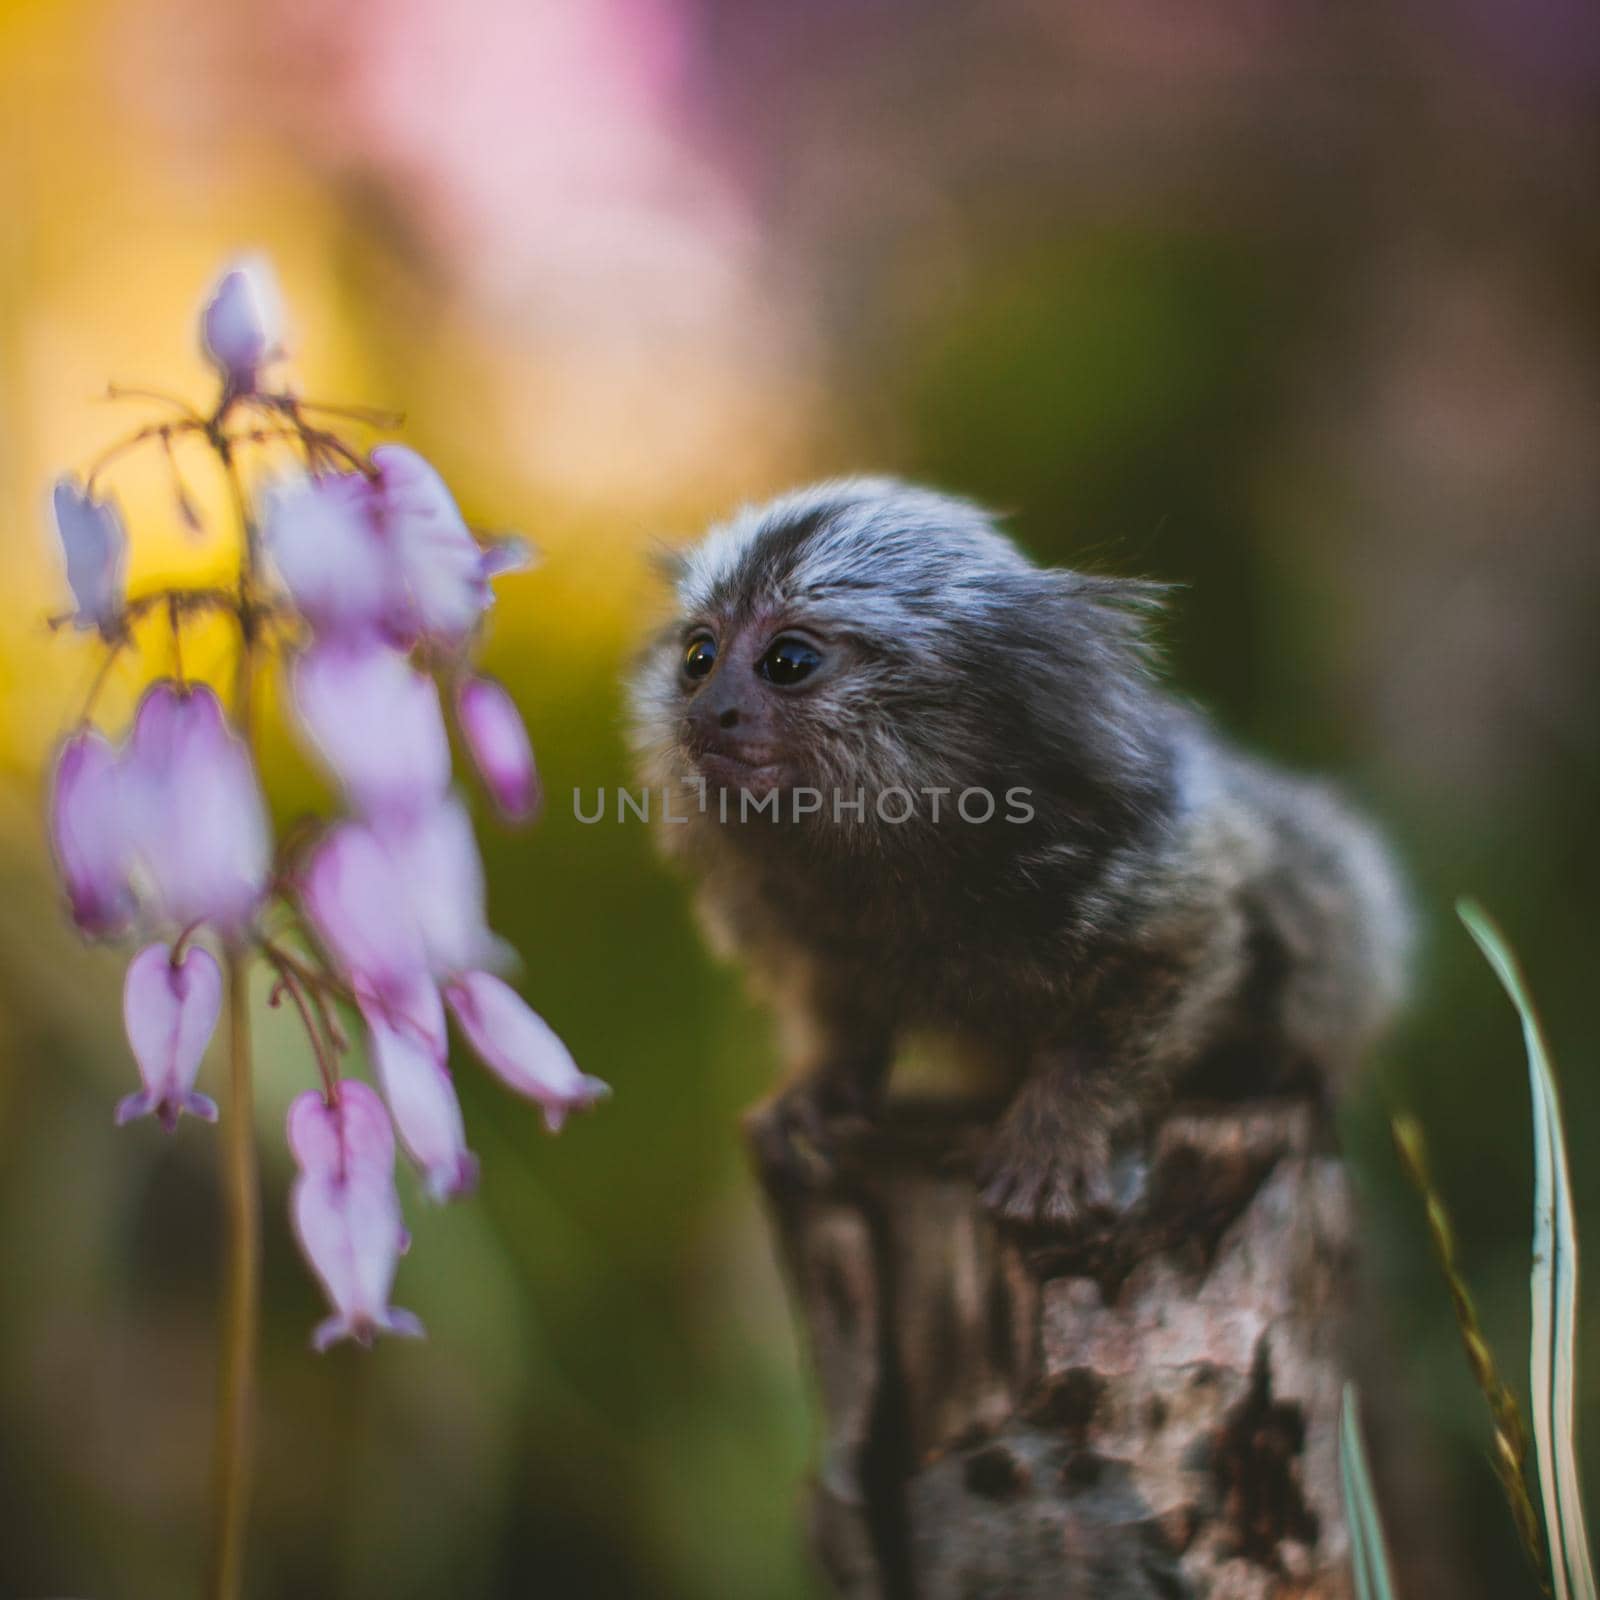 The common marmoset baby on the branch in summer garden by RosaJay